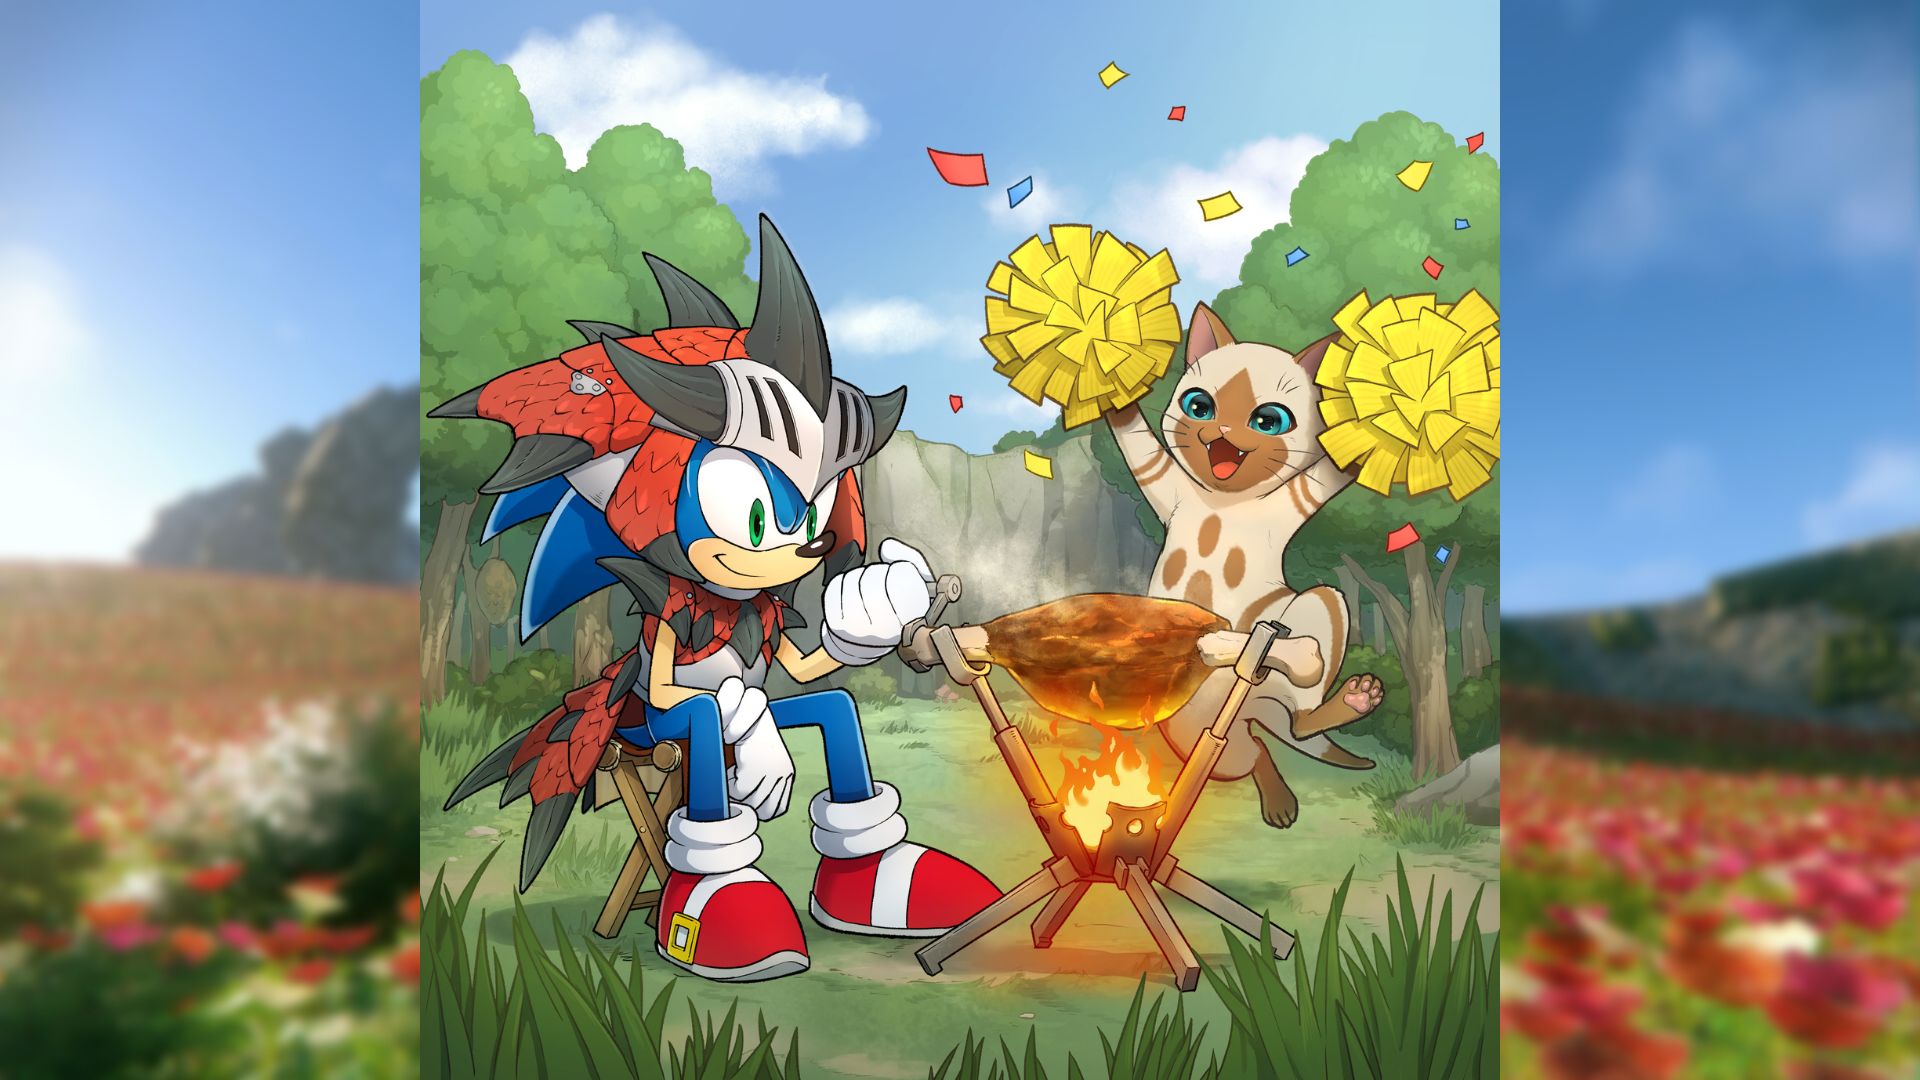 Sonic Frontiers free Monster Hunter collaboration DLC announced